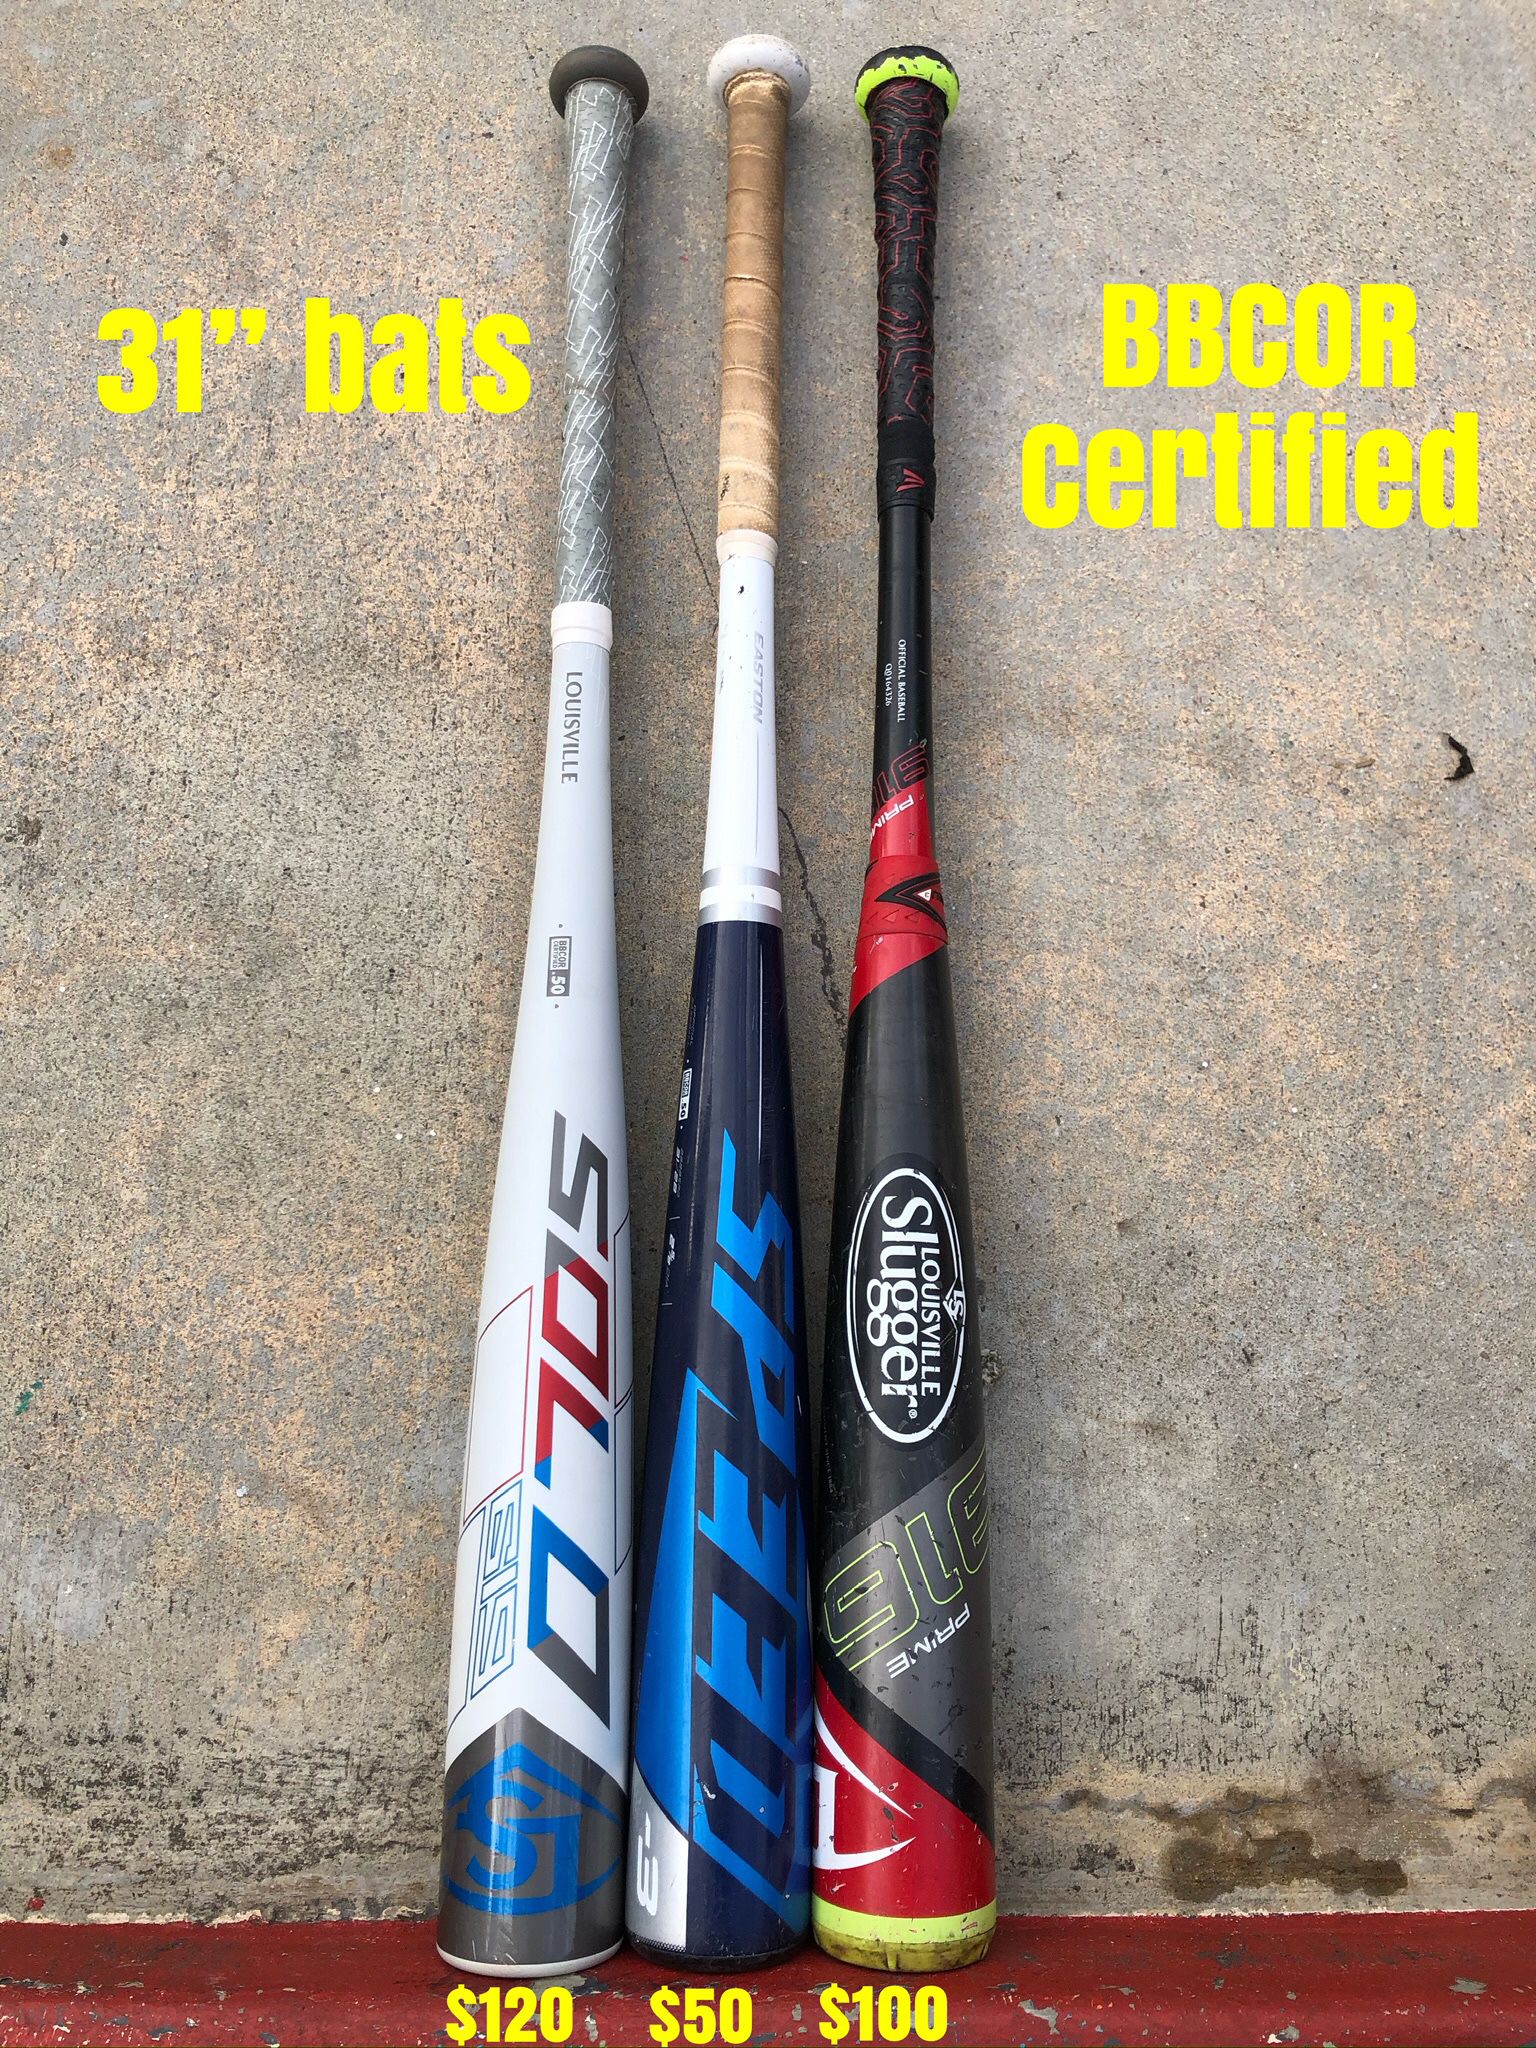 Baseball Bats  31” BBCOR Certified Prices are labeled in the pictures. Have More Baseball And Softball Equipment Available